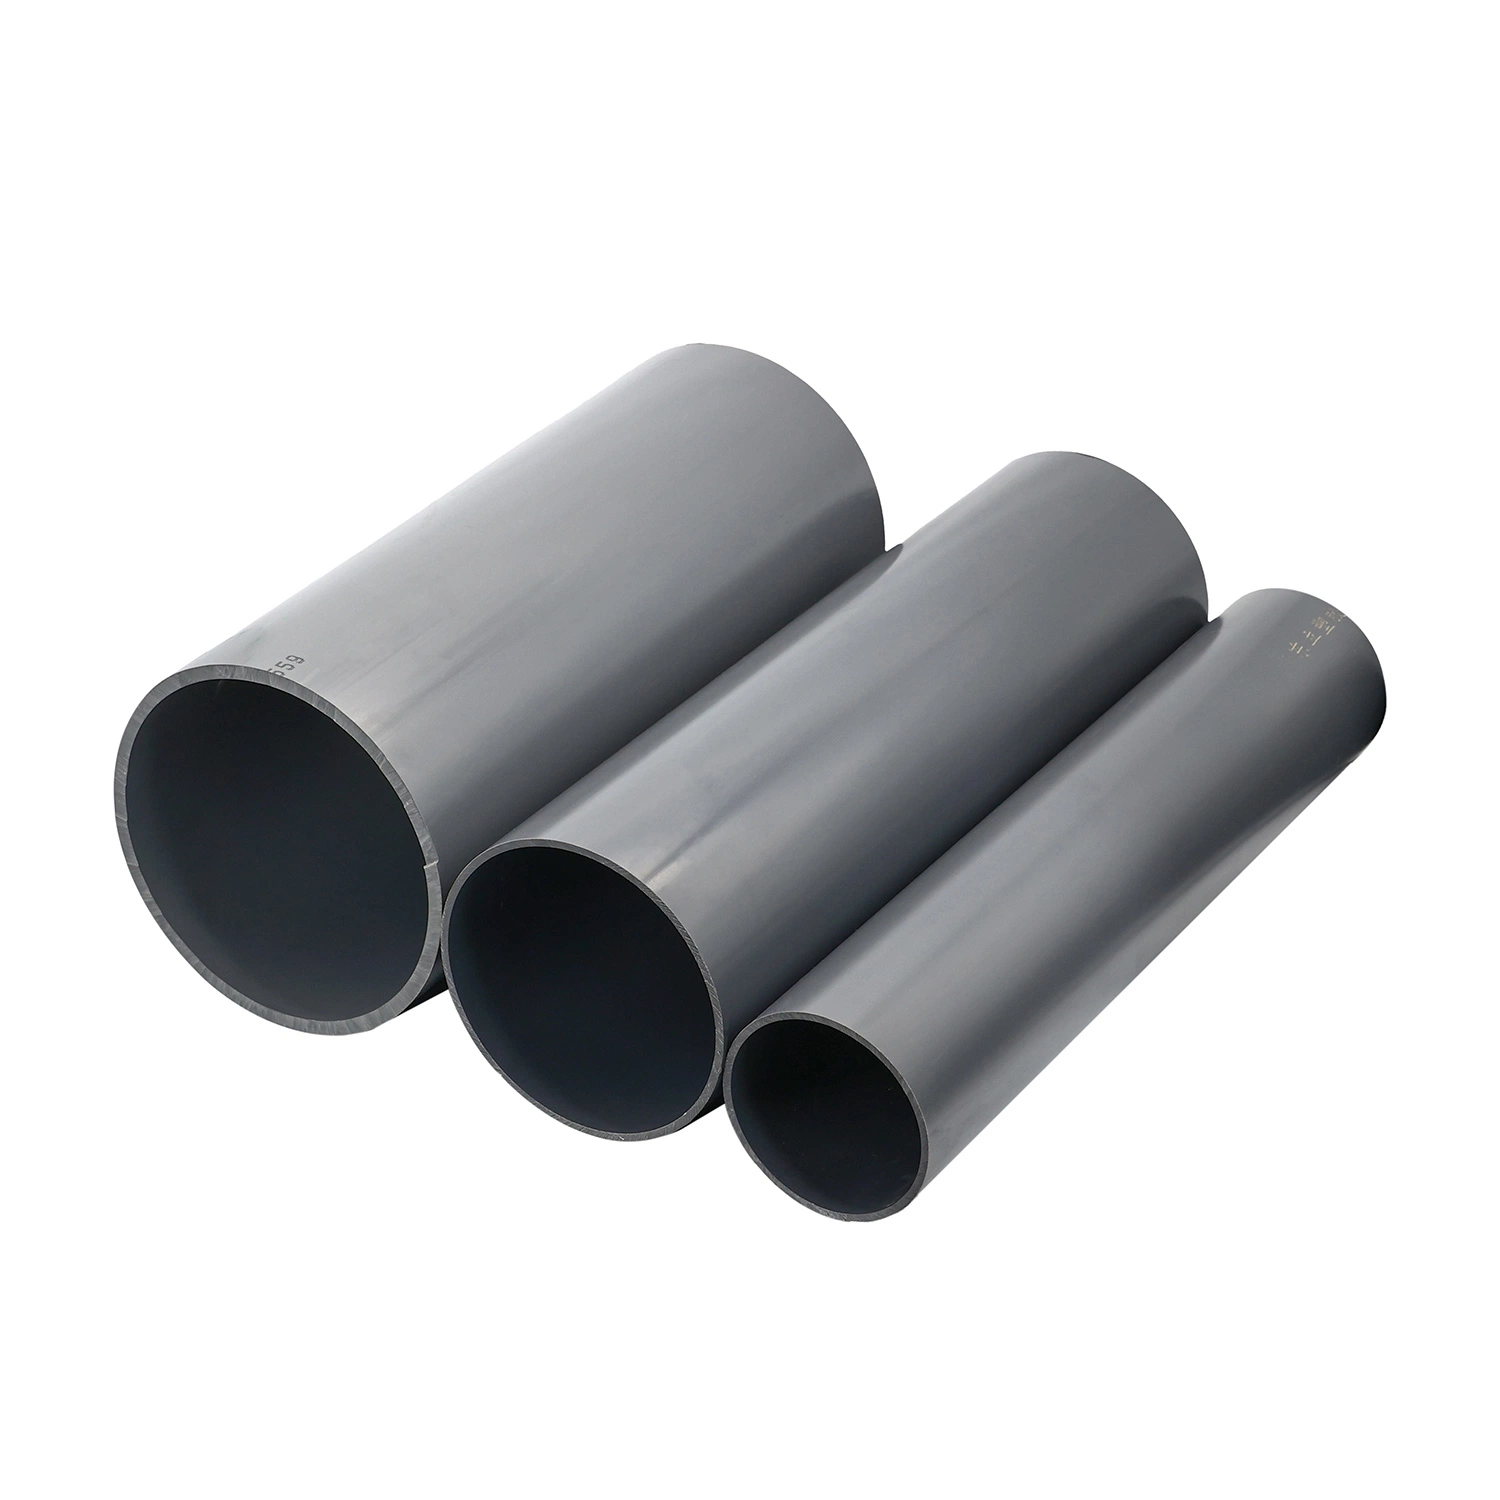 Plastic Grey/White Color PVC UPVC MPVC Water Pipe for Water Supply /Irrigation/Greenhouse/Conduit/Chemical with ISO Standard